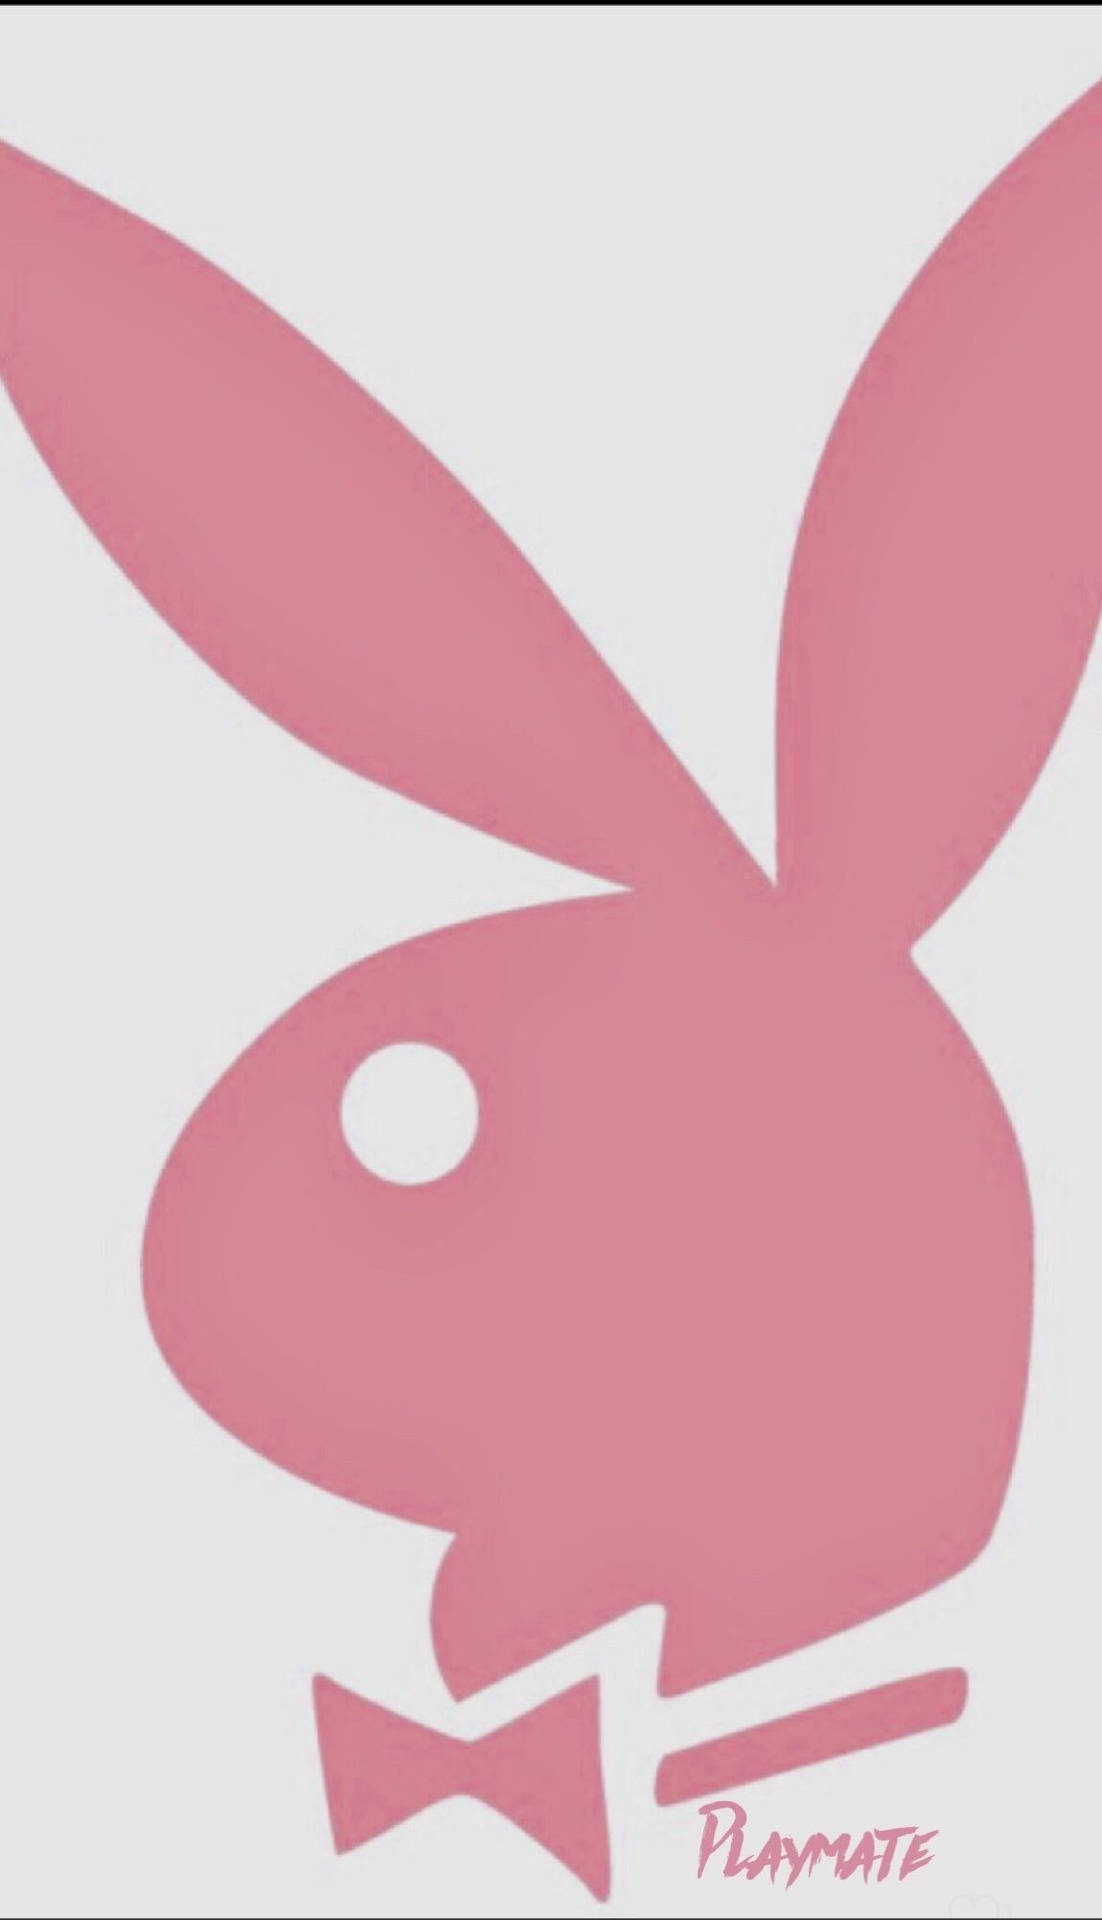 A Relaxed Evening At Playboy Aesthetic Wallpaper